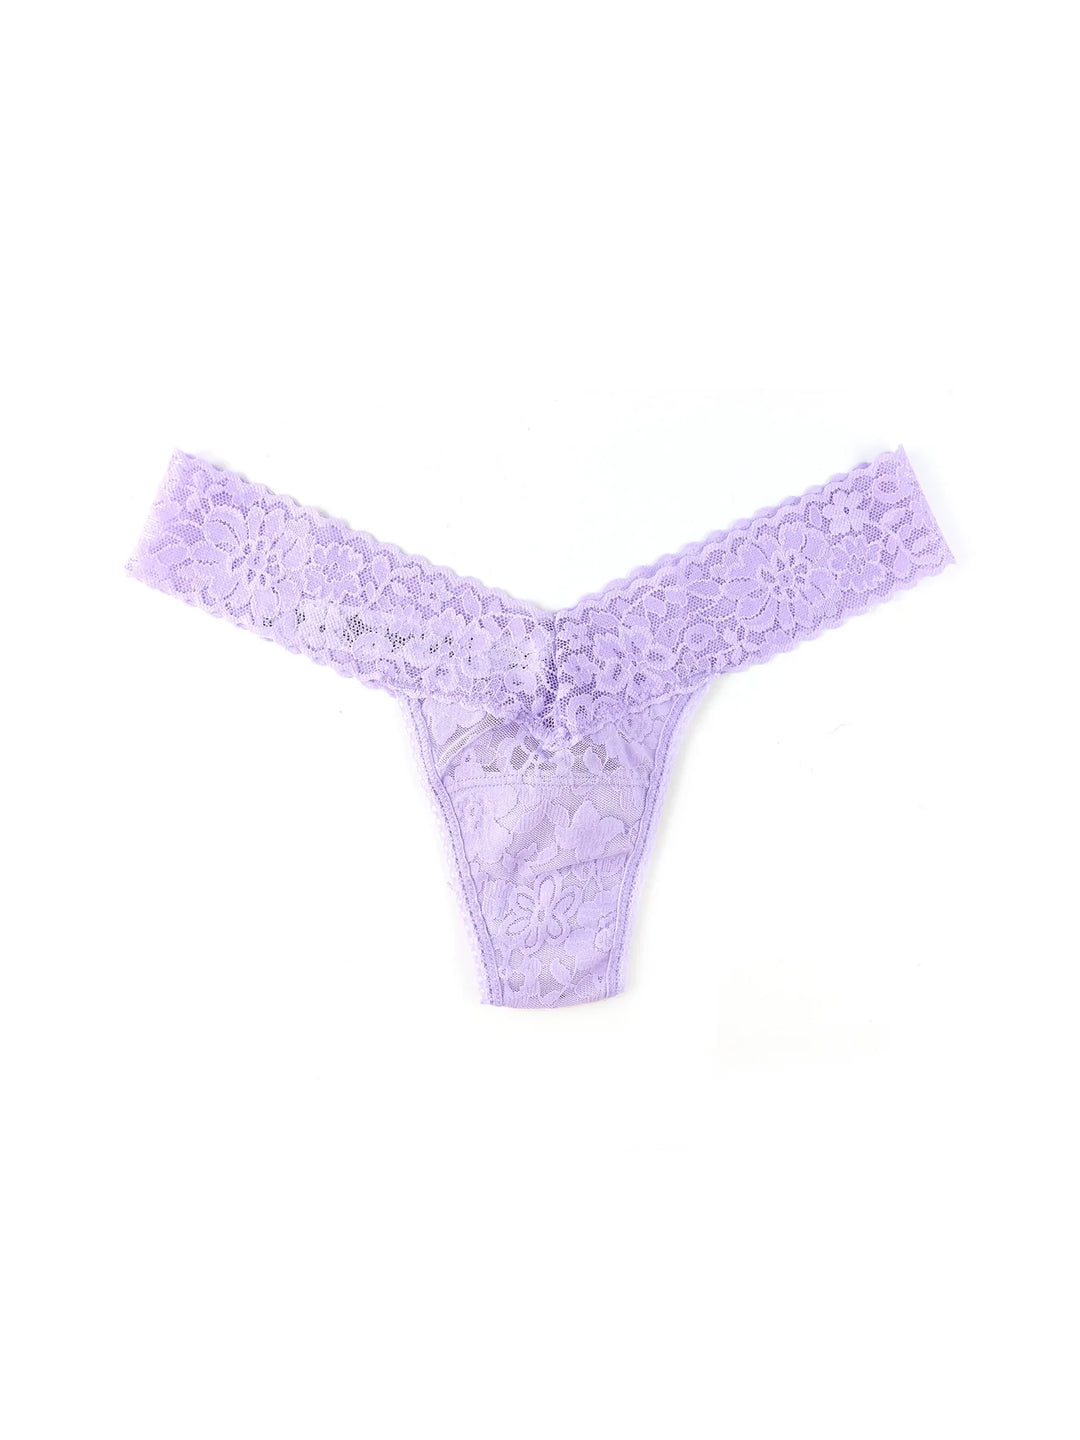 DAILY LACE LOWRISE THONG PACK- MOON CRYSTAL PURPLE